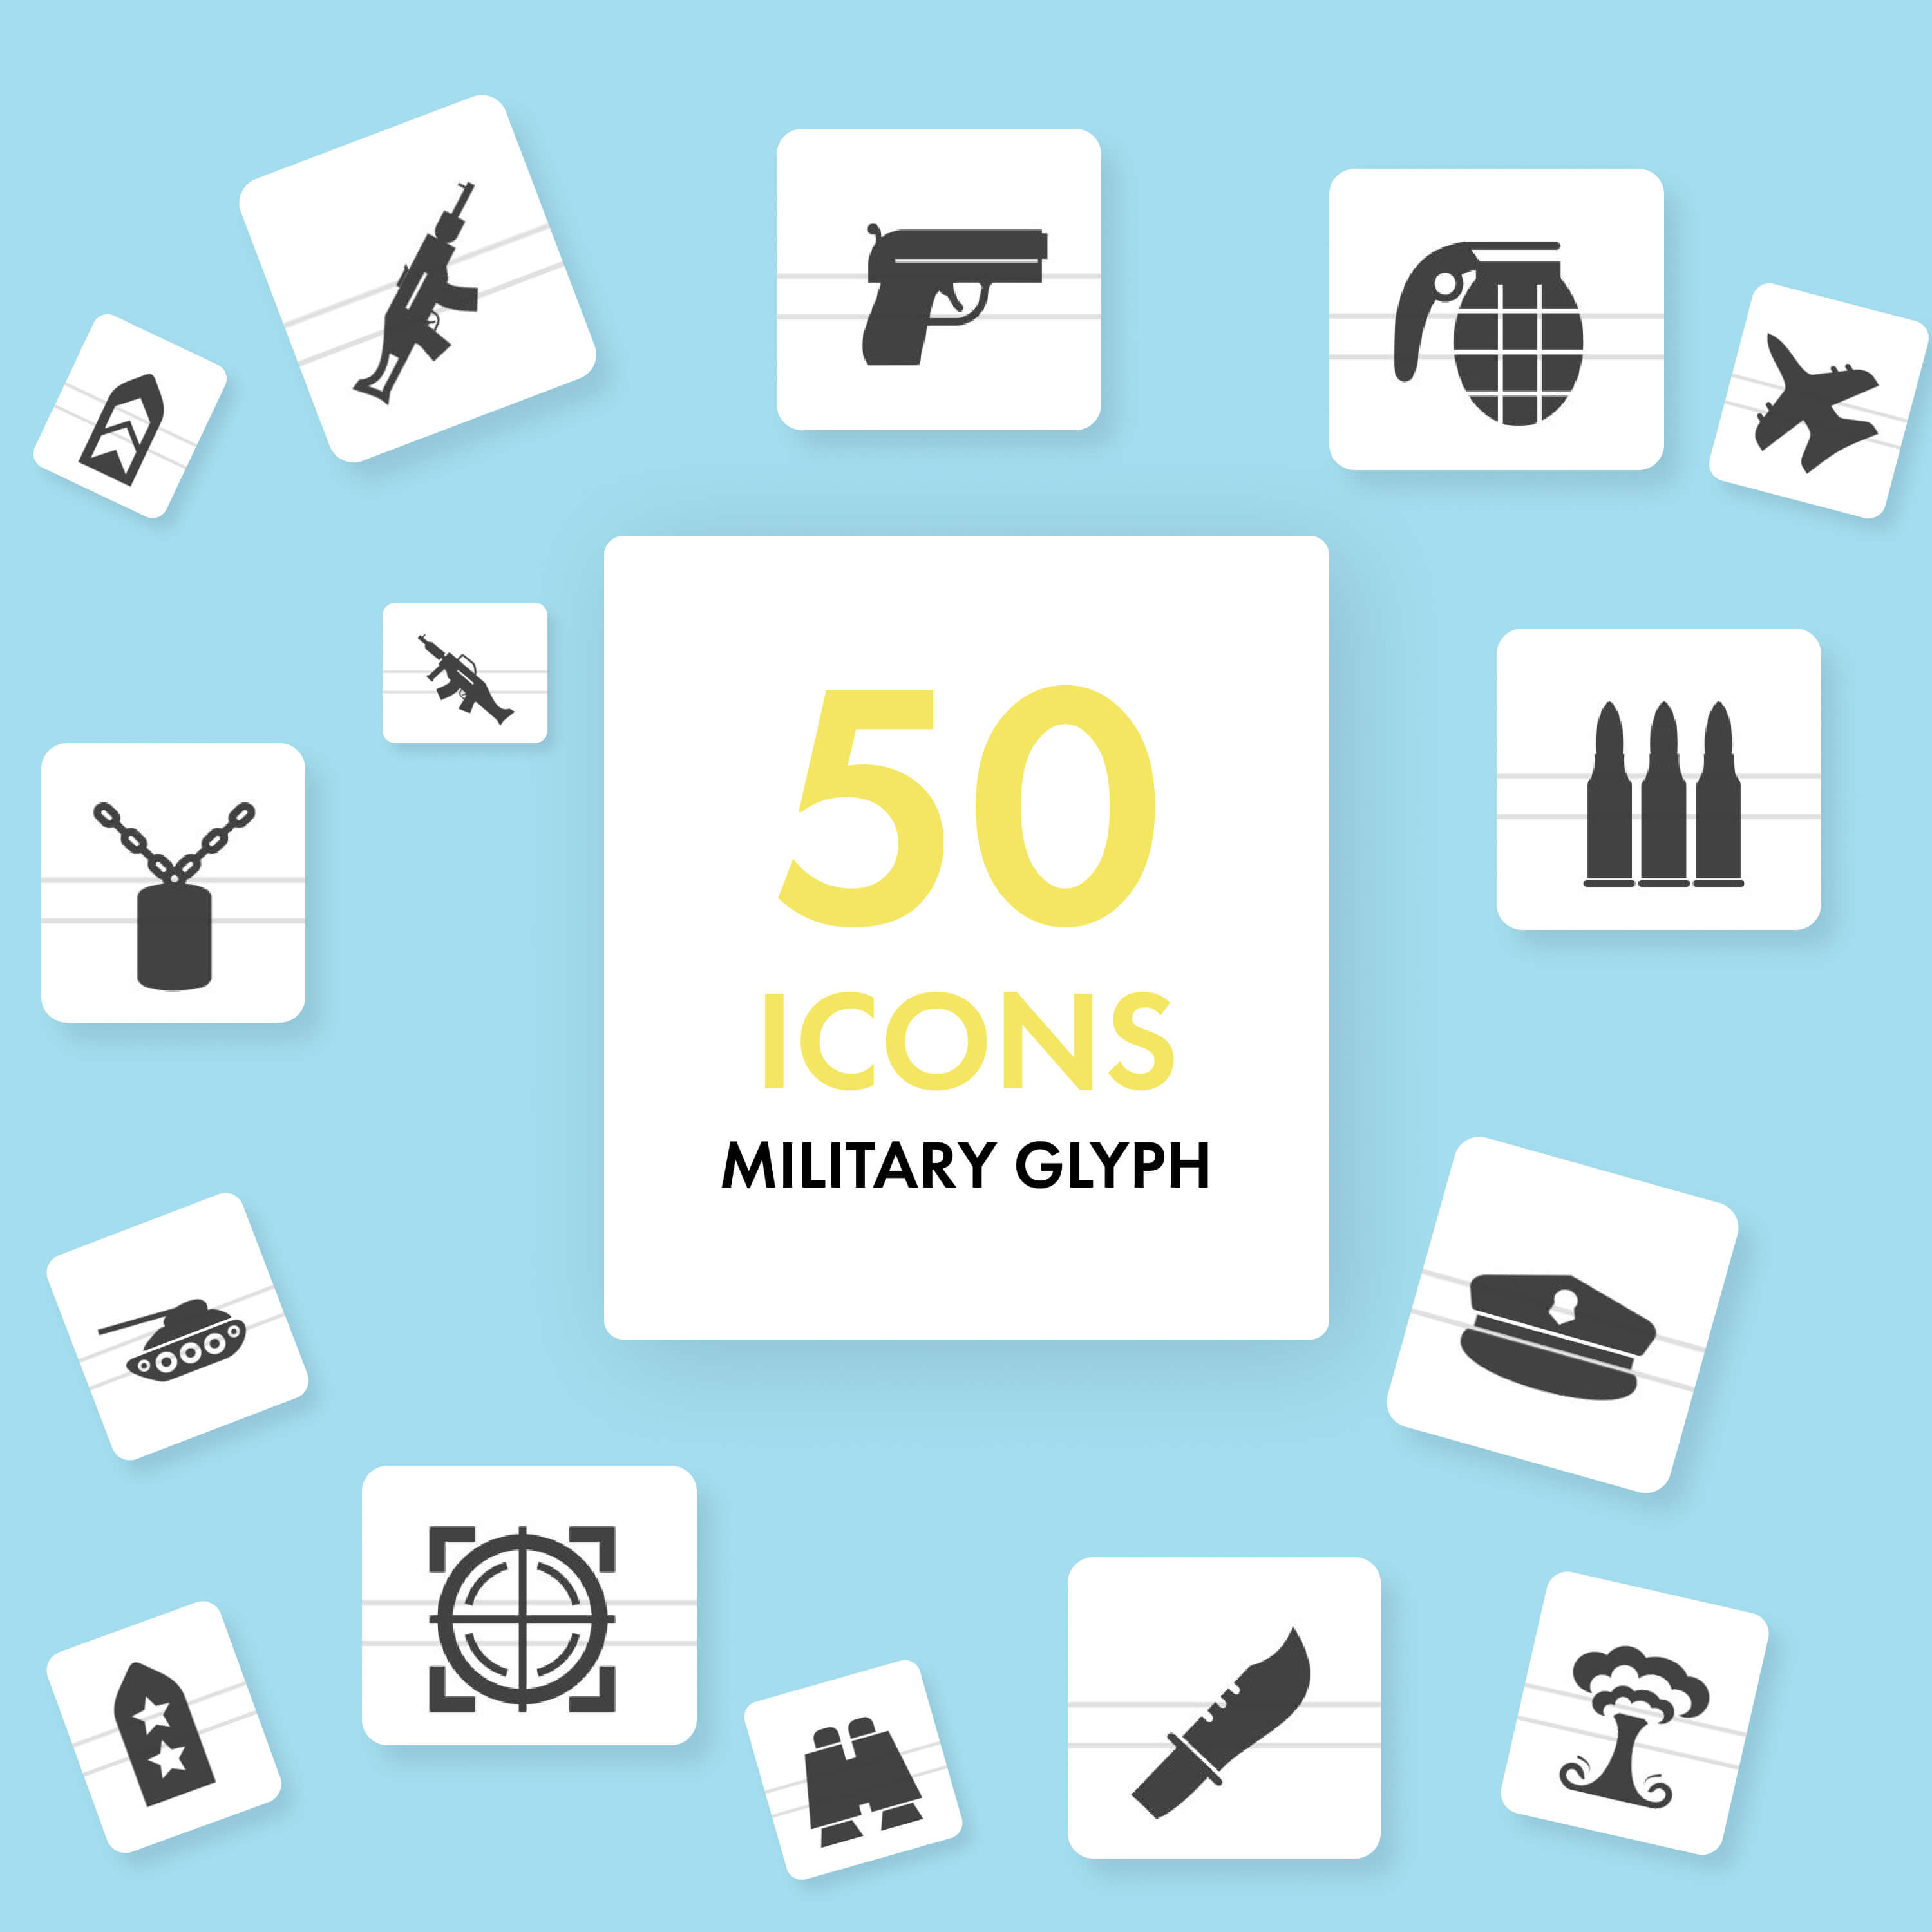 50 icons military glyph on the blue background.